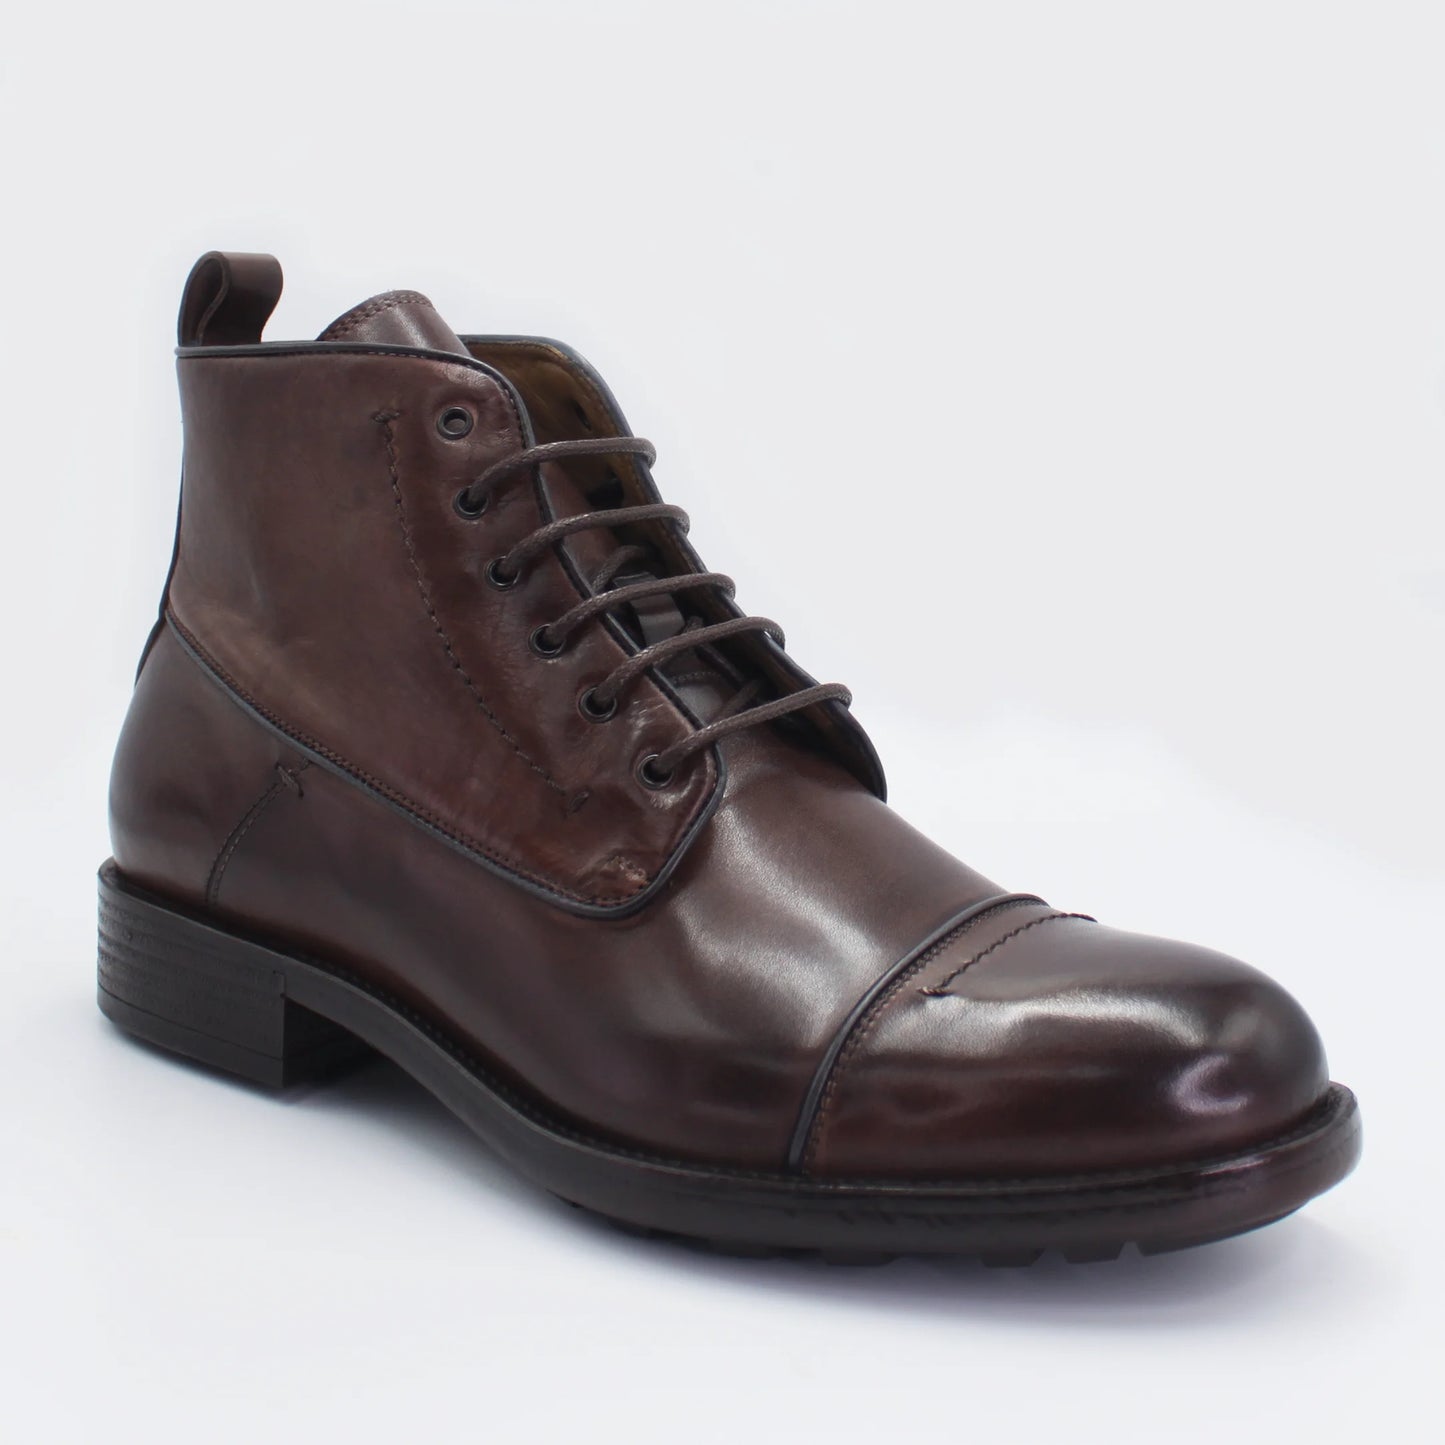 Shop Handmade Italian Leather Lace-Up Boot in Cioccolato Brown (10876) or browse our range of hand-made Italian boots for men in leather or suede in-store at Aliverti Durban or Cape Town, or shop online. We deliver in South Africa & offer multiple payment plans as well as accept multiple safe & secure payment methods.